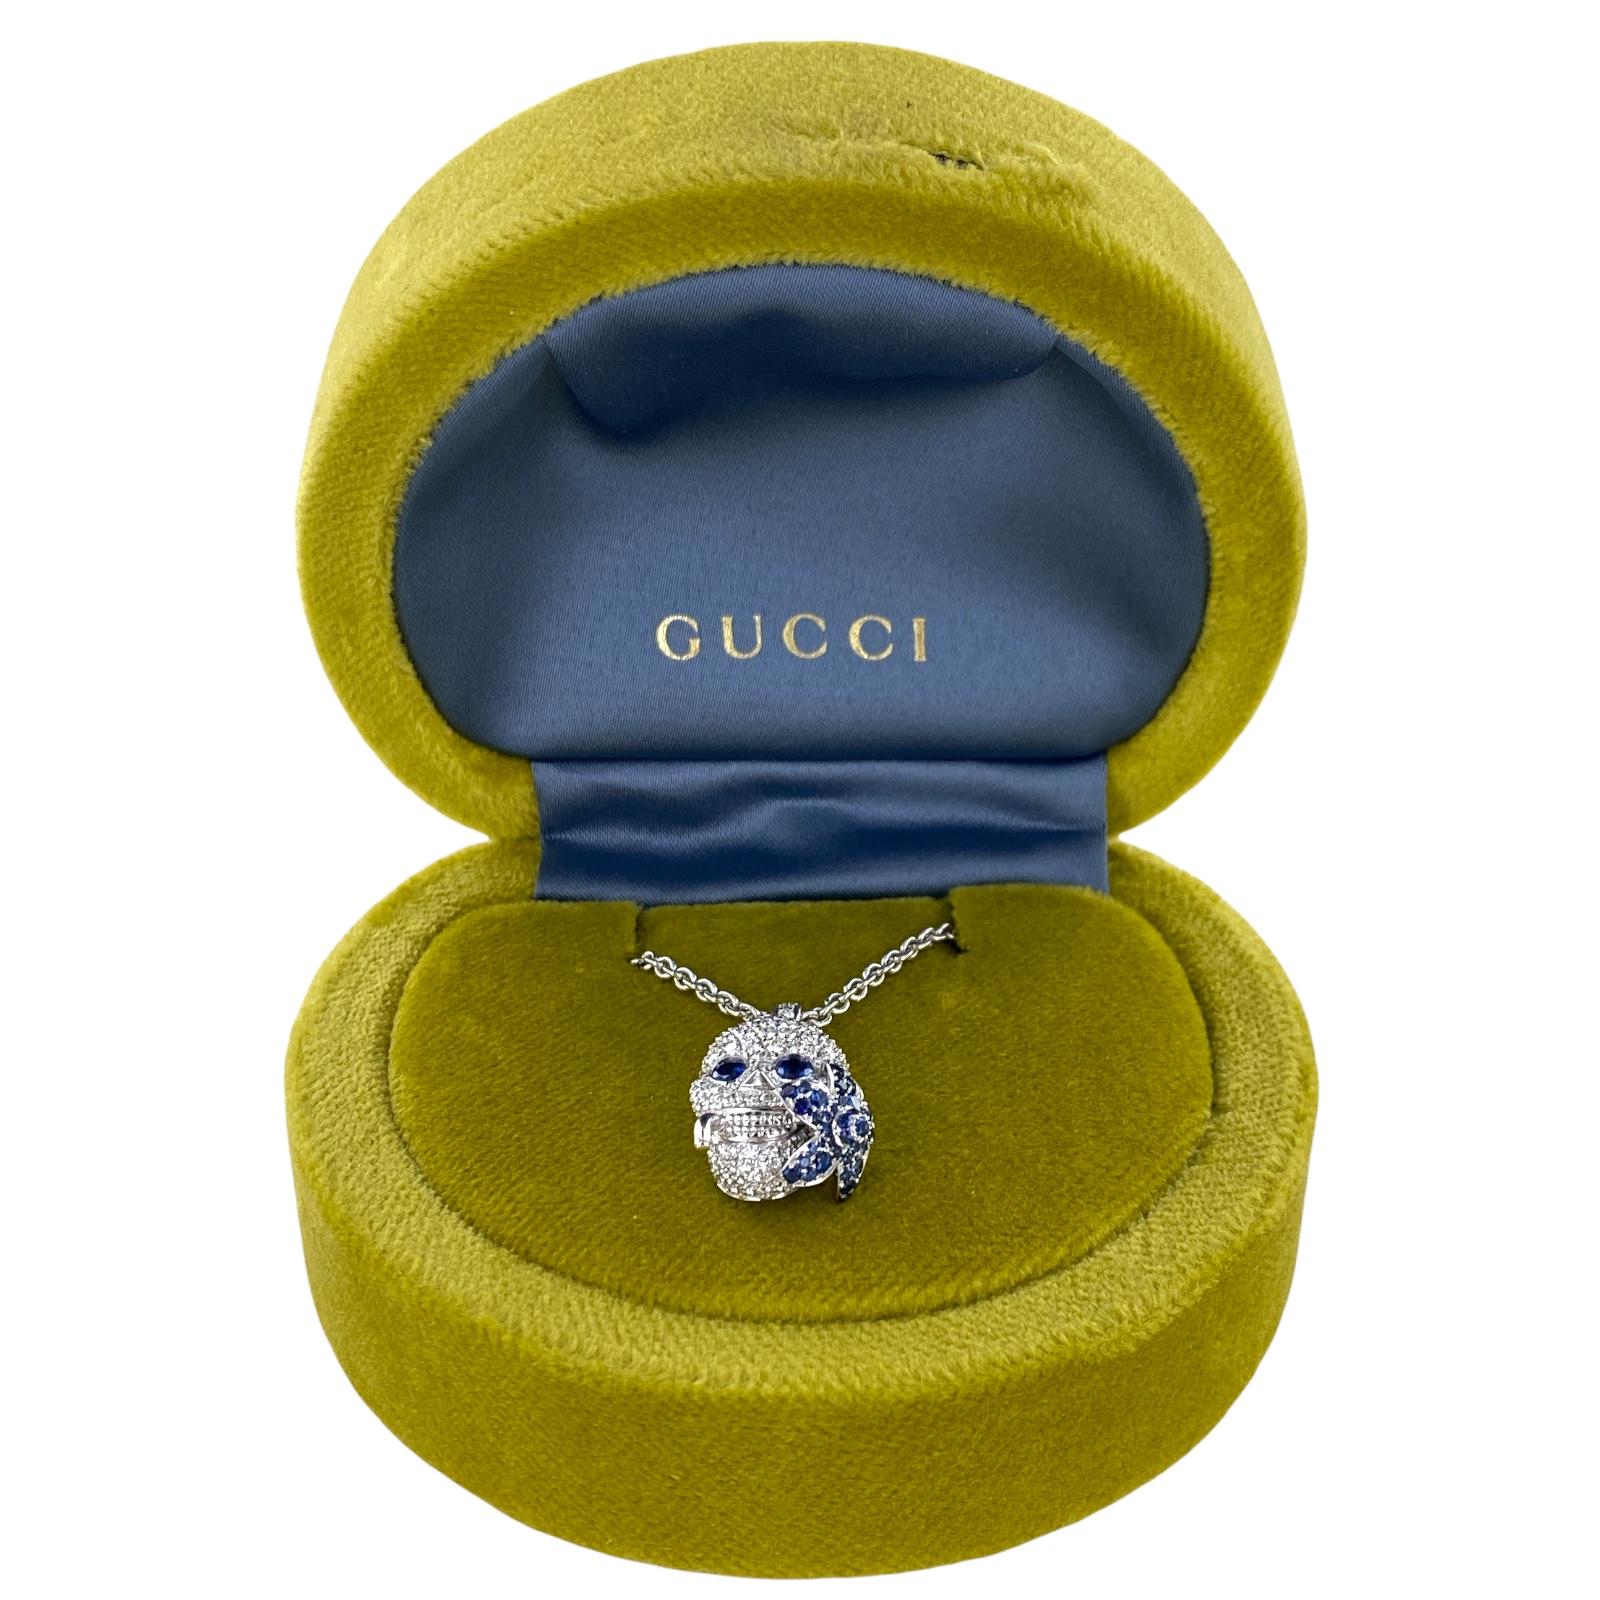 Gucci diamond blue sappphire skull pendant necklace fashioned in 18 karat white gold. The pendant features round brilliant cut diamonds, natural blue sapphires, and measures 1.0 x .50 inches. The pendant is on the original Gucci chain that can be